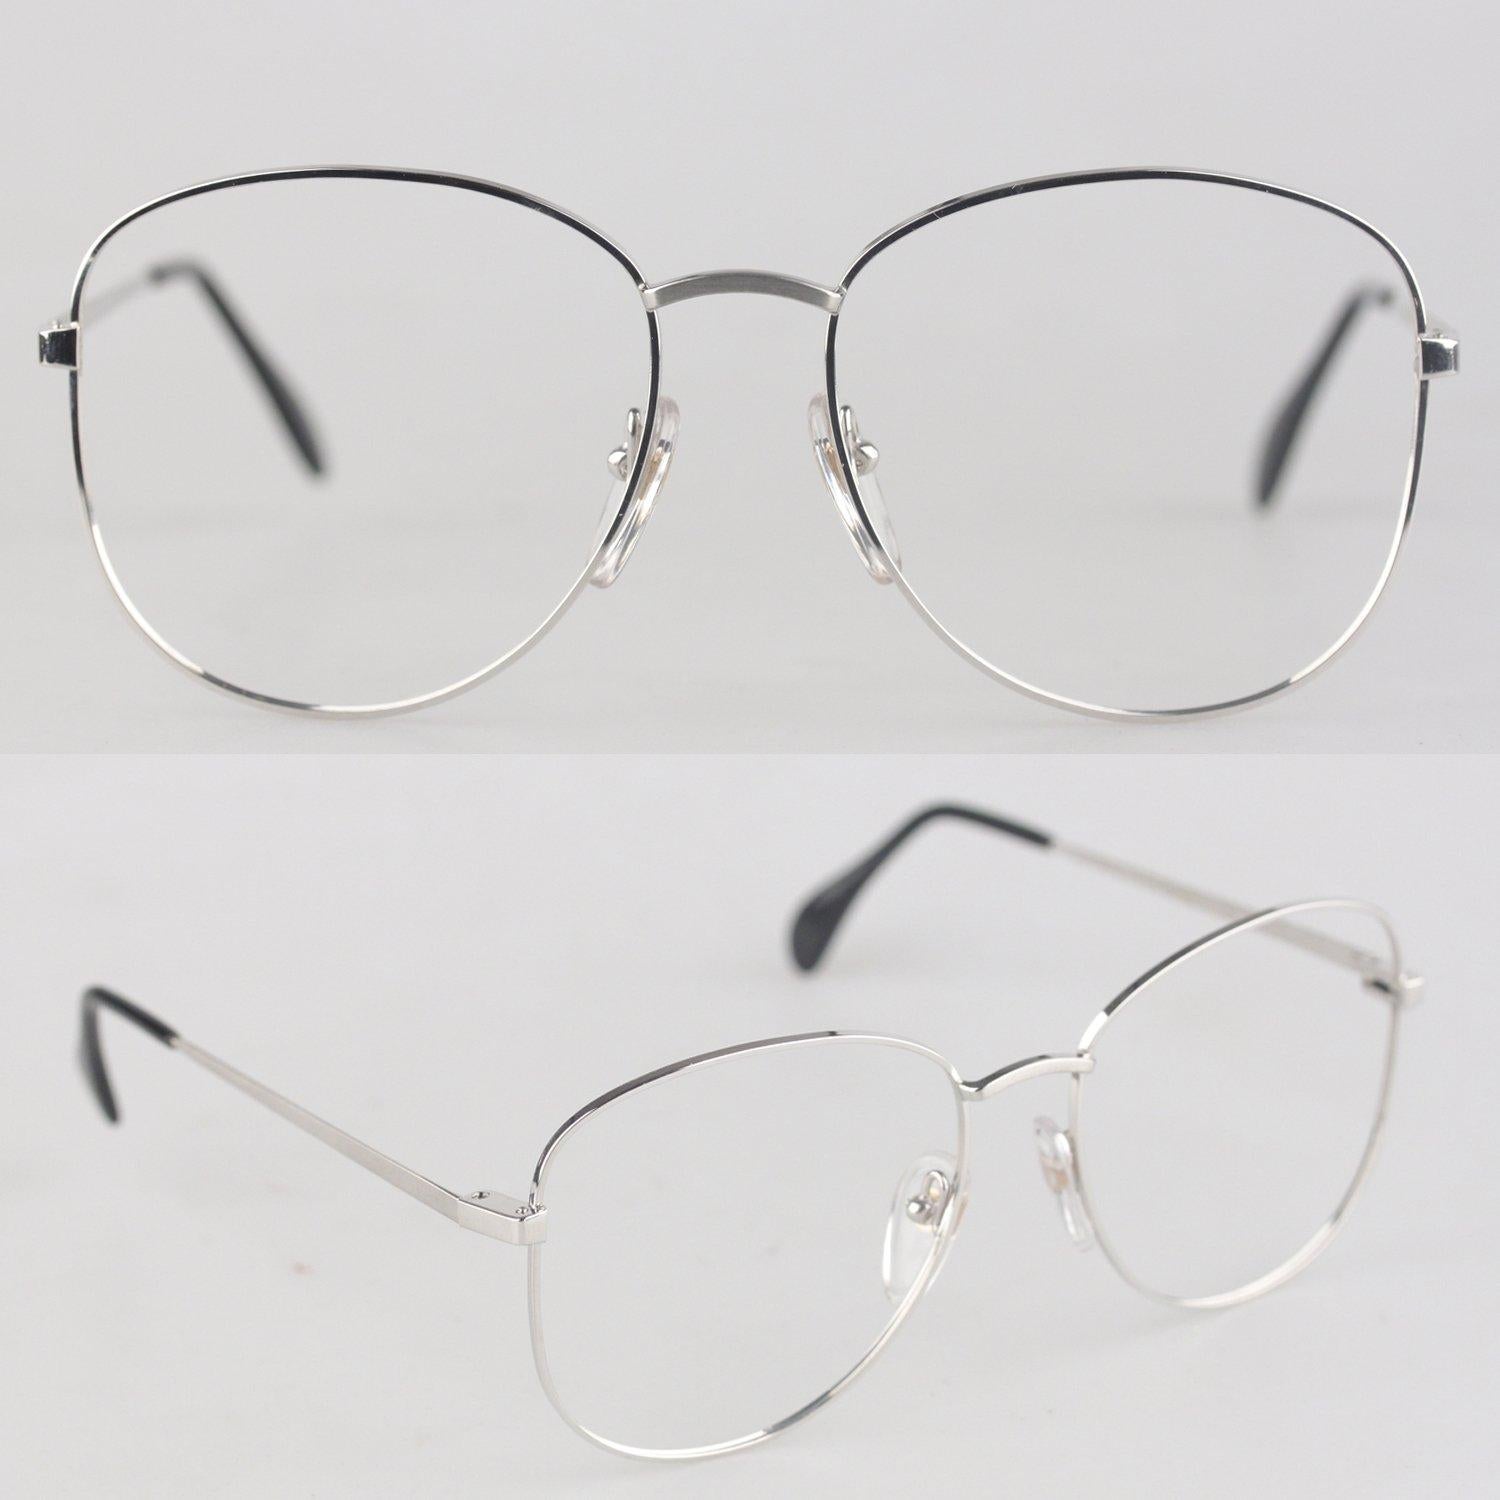 Matt Silver tone Vintage oversize look eyglasses by Bausch & Lomb. Made in West Germany. Silver color, White-Gold Filled Frame (1/20 - 10K White-Gold). Model: 512- 56/16 - 140 mm. Details MATERIAL: Gold Filled COLOR: Silver MODEL: GENDER: Adult